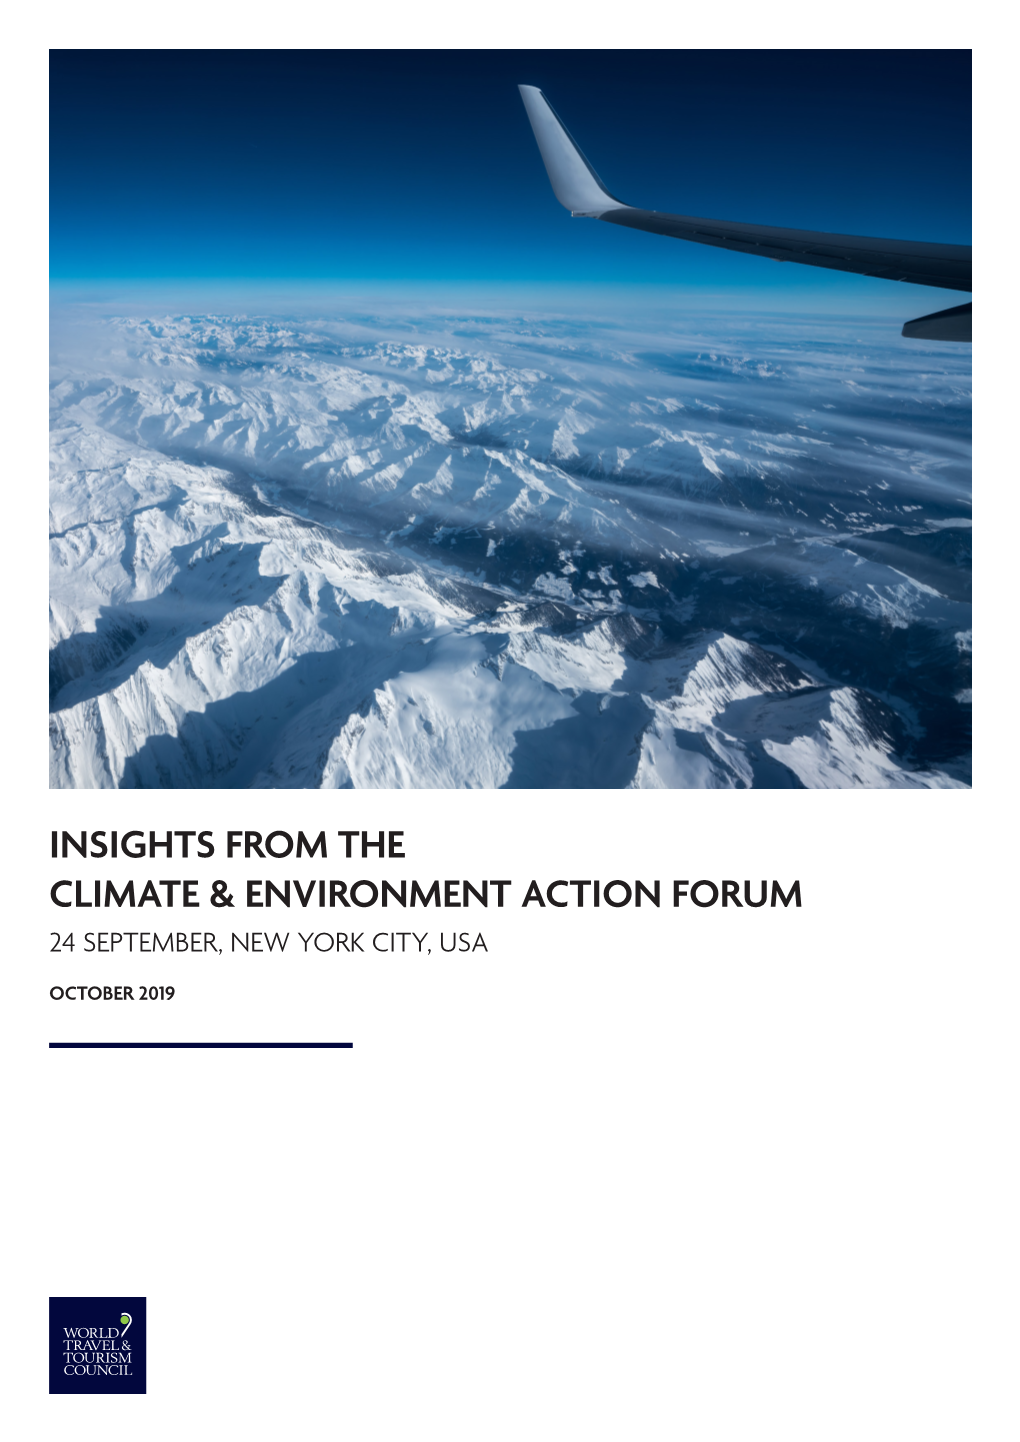 Insights from the Climate & Environment Action Forum